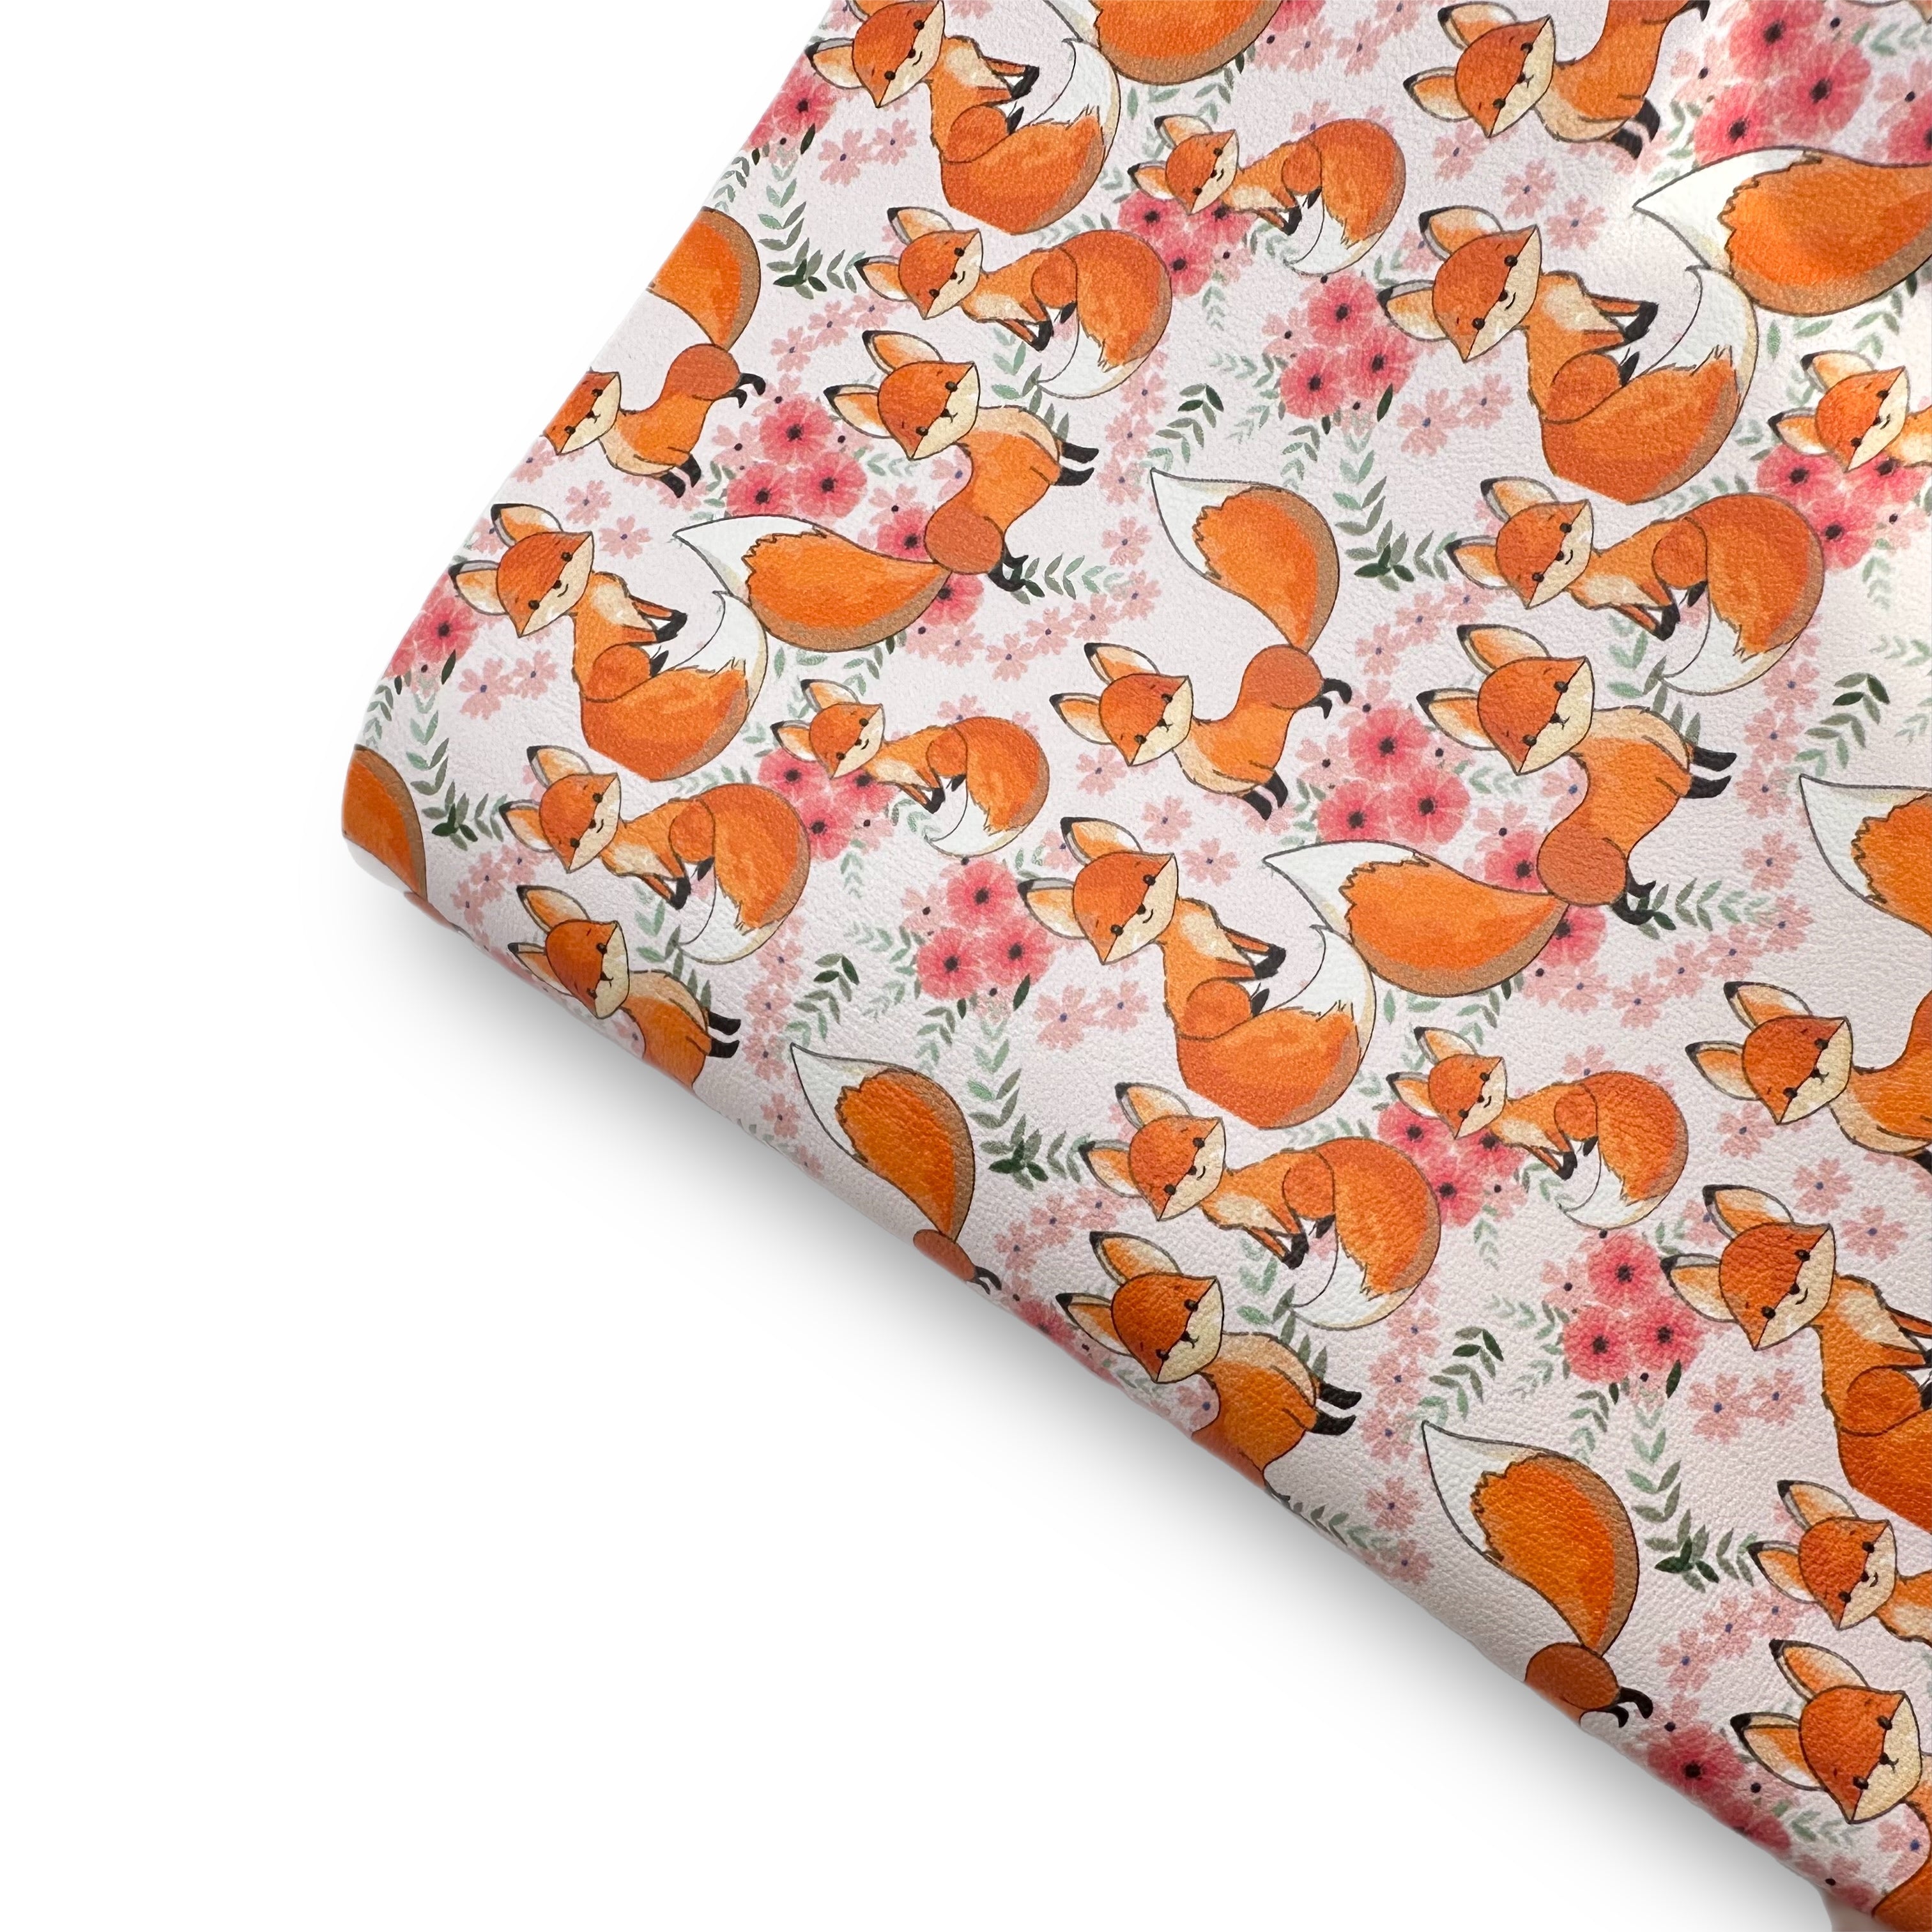 Pretty Foxes Premium Faux Leather Fabric Sheets